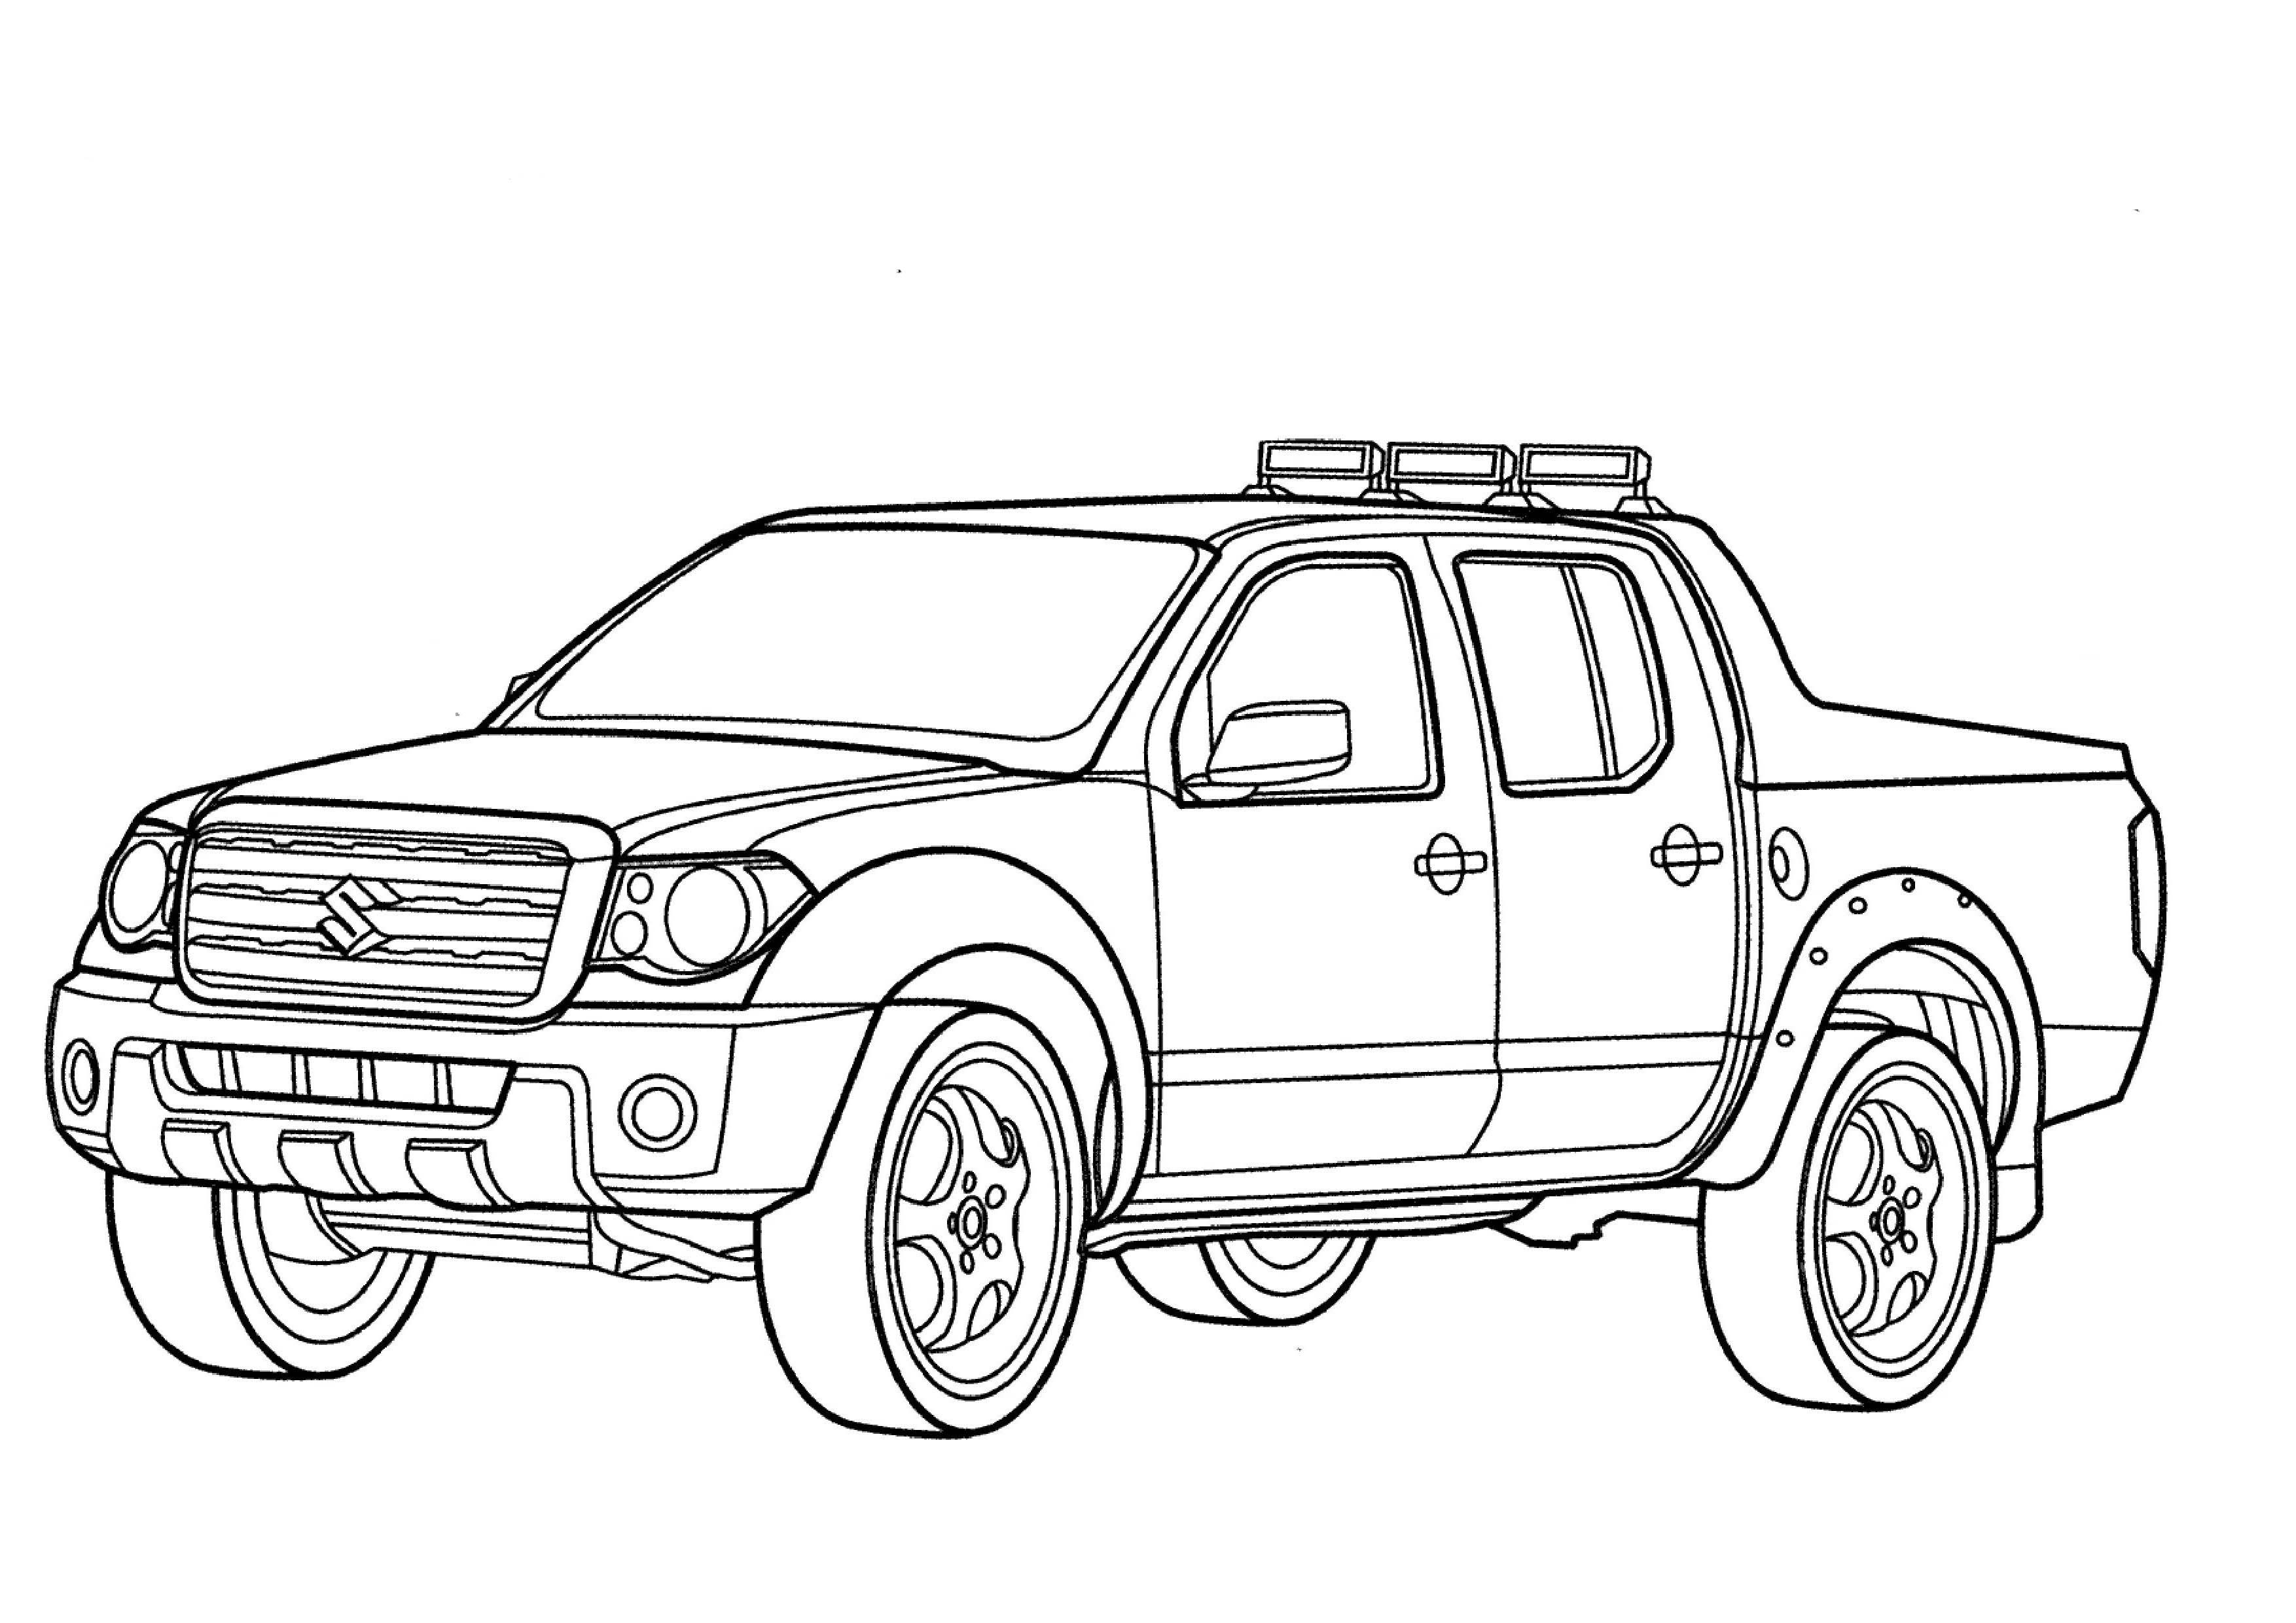 Ford F150 Coloring Pages at GetColorings.com  Free printable colorings